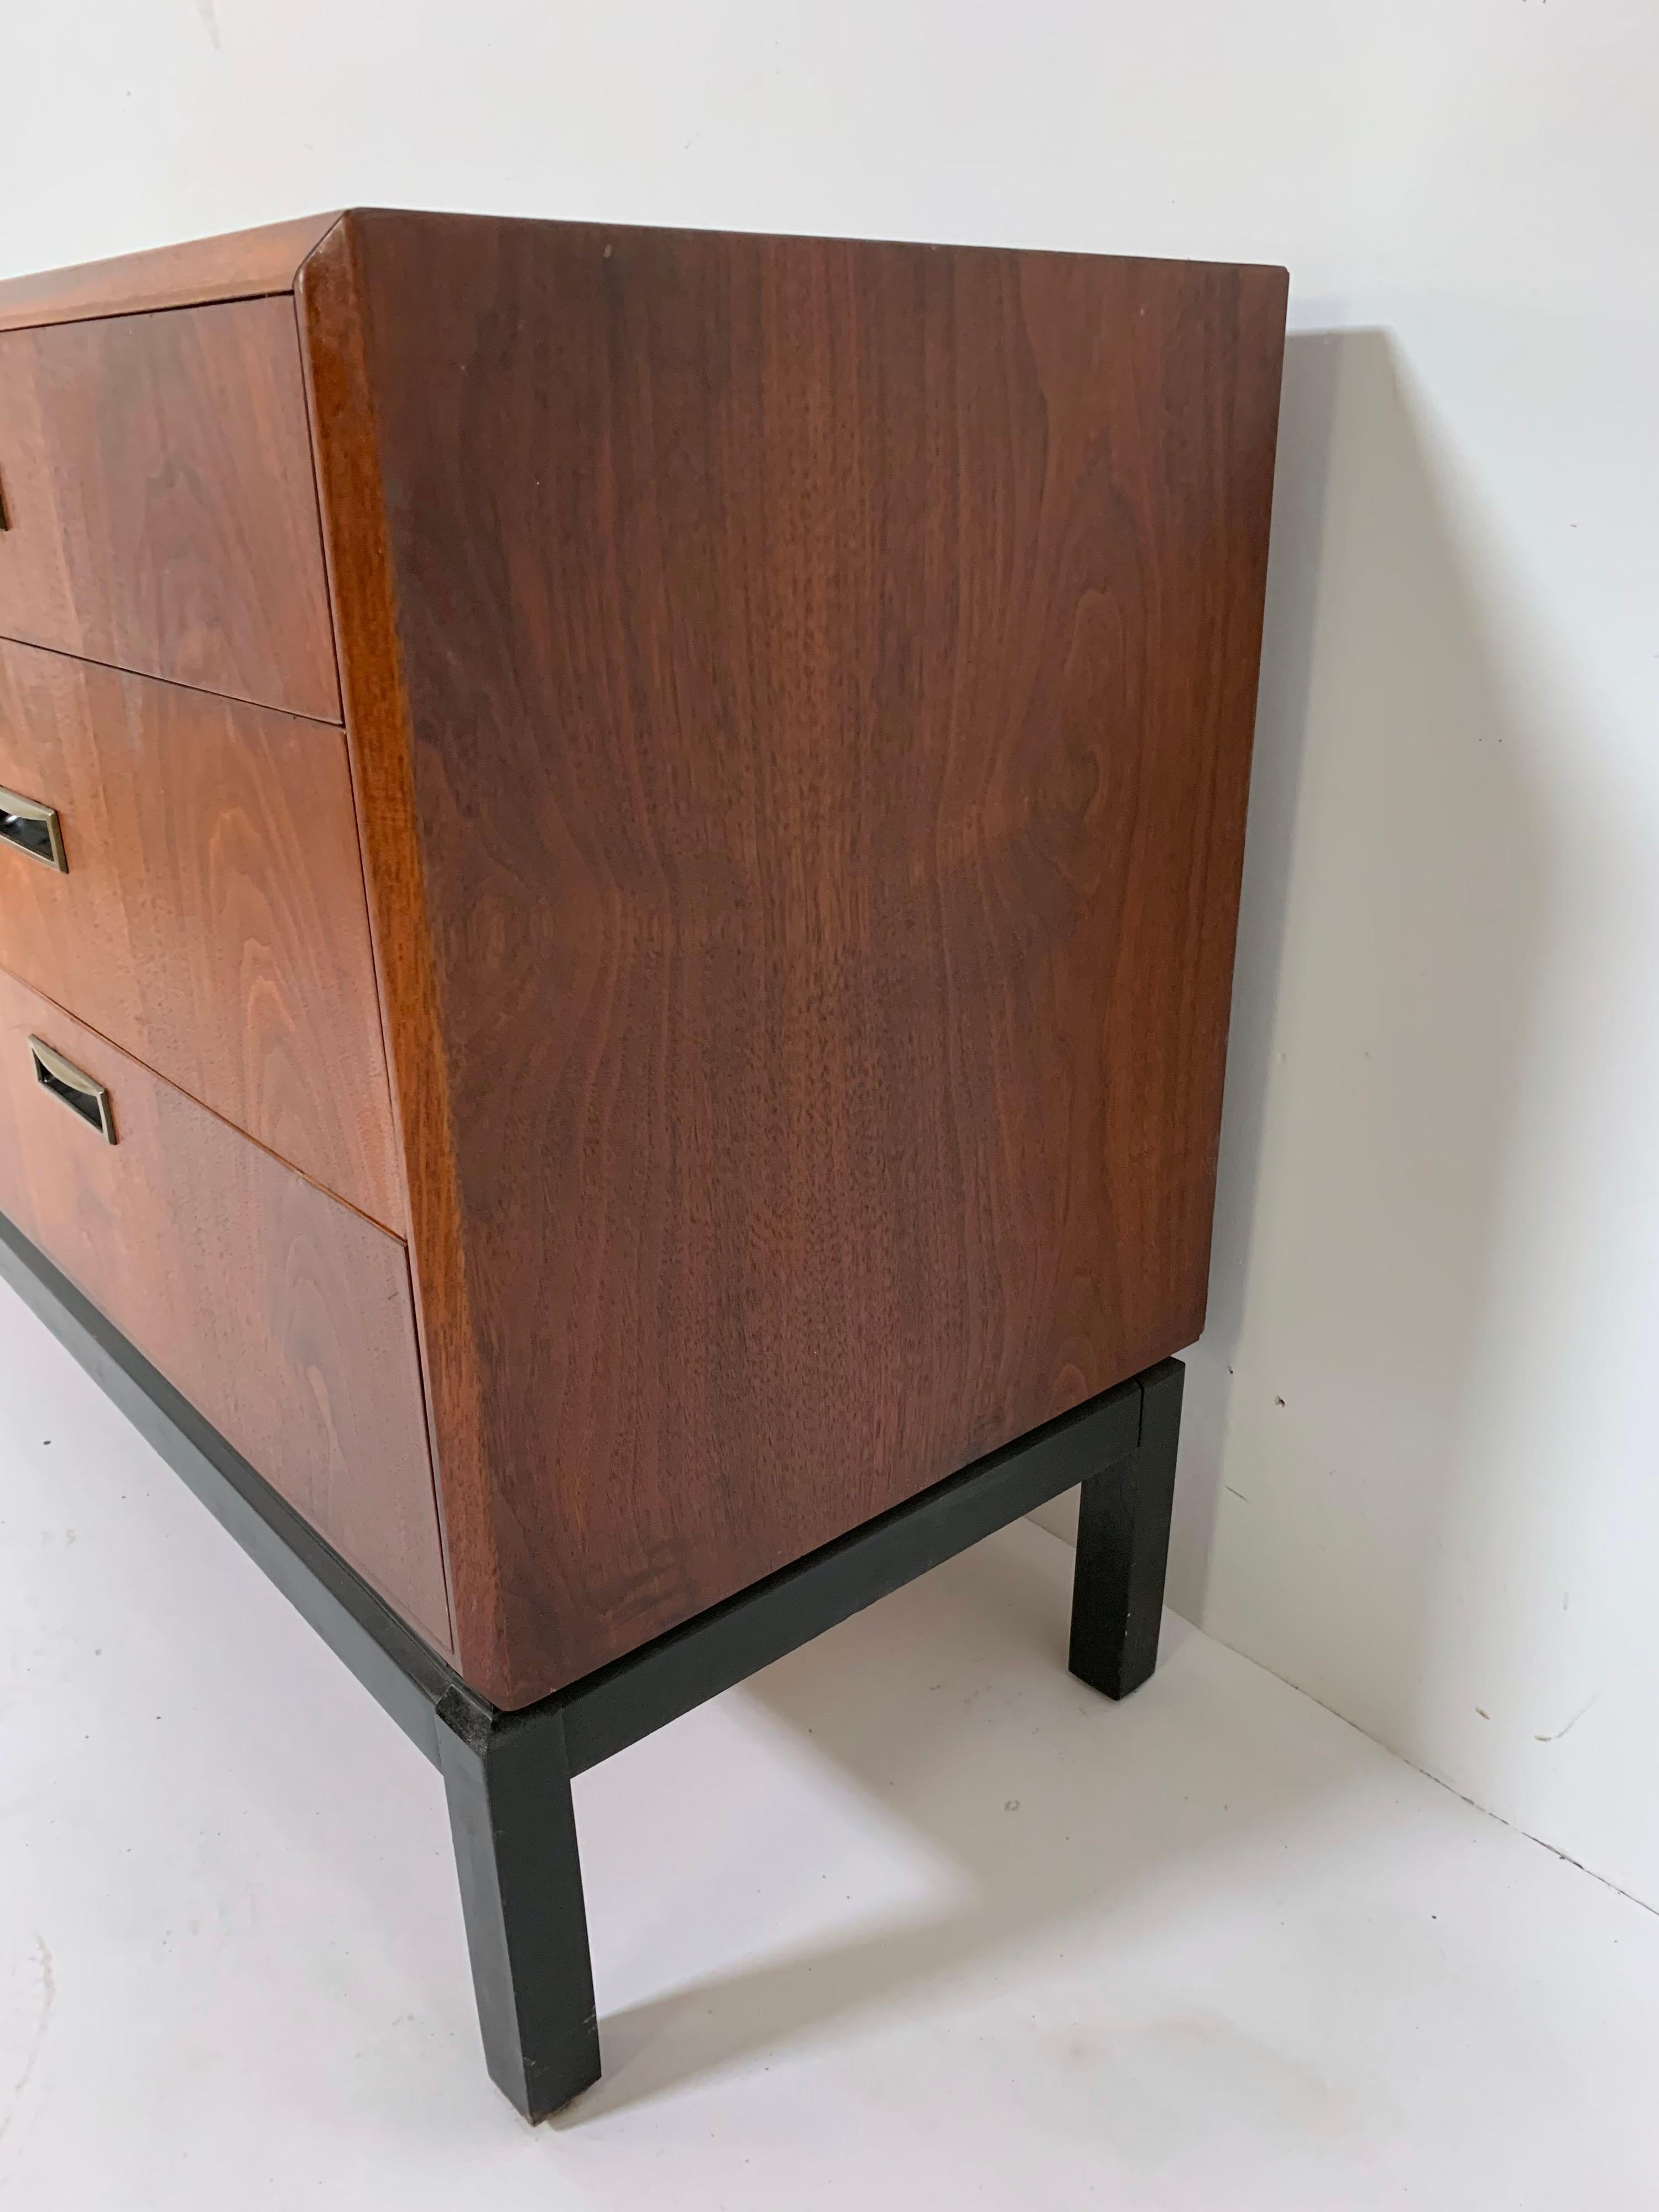 Midcentury Six-Drawer Walnut Dresser by Jack Cartwright for Founders circa 1970s 5